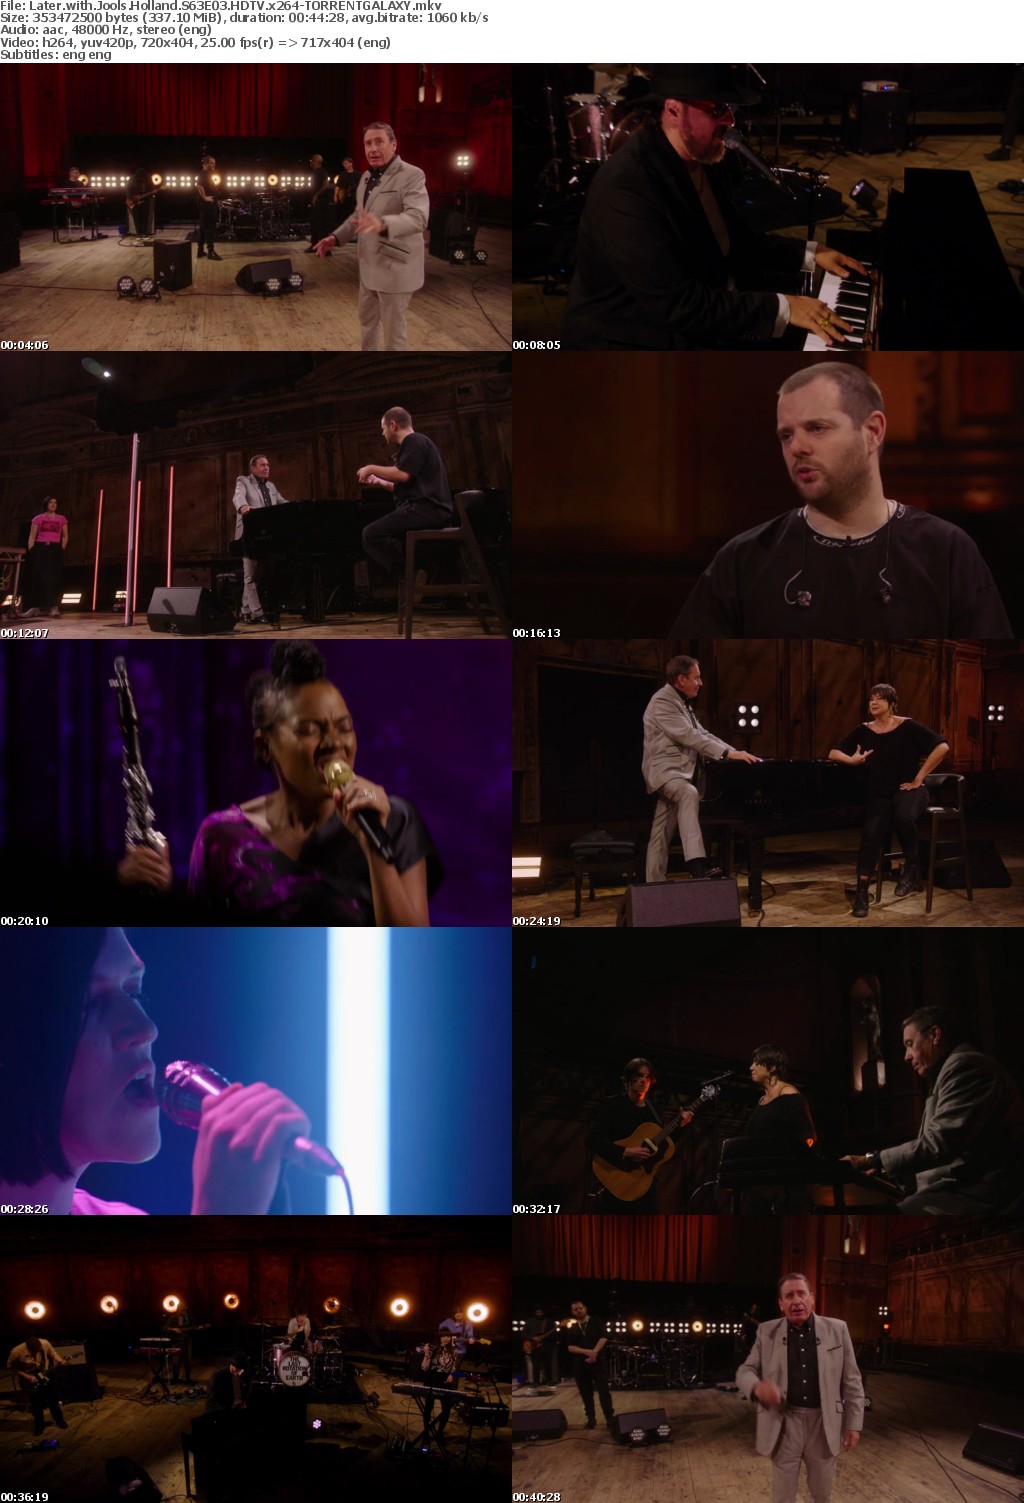 Later with Jools Holland S63E03 HDTV x264-GALAXY